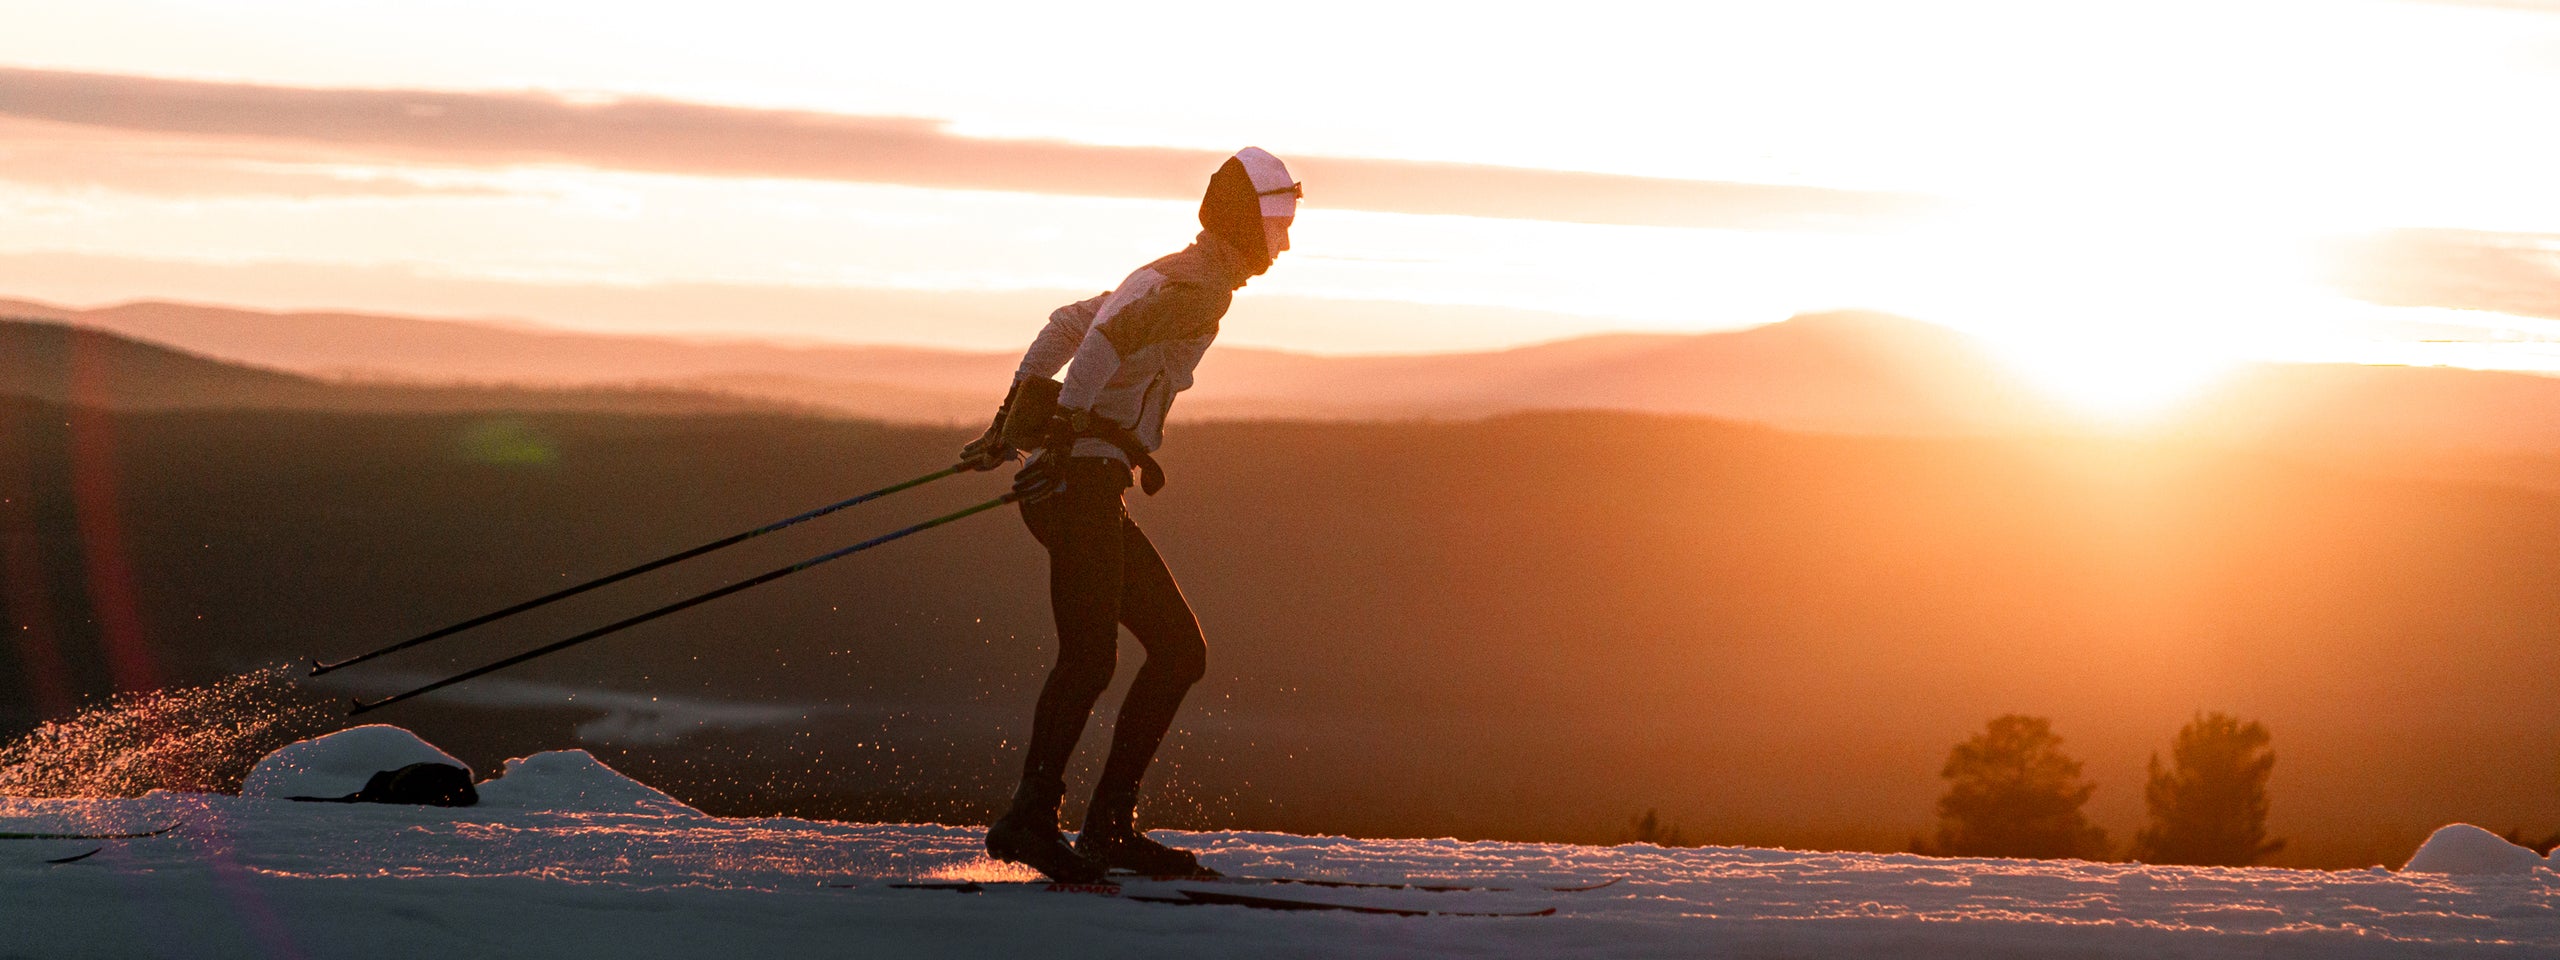 Get ready for cross-country skiing